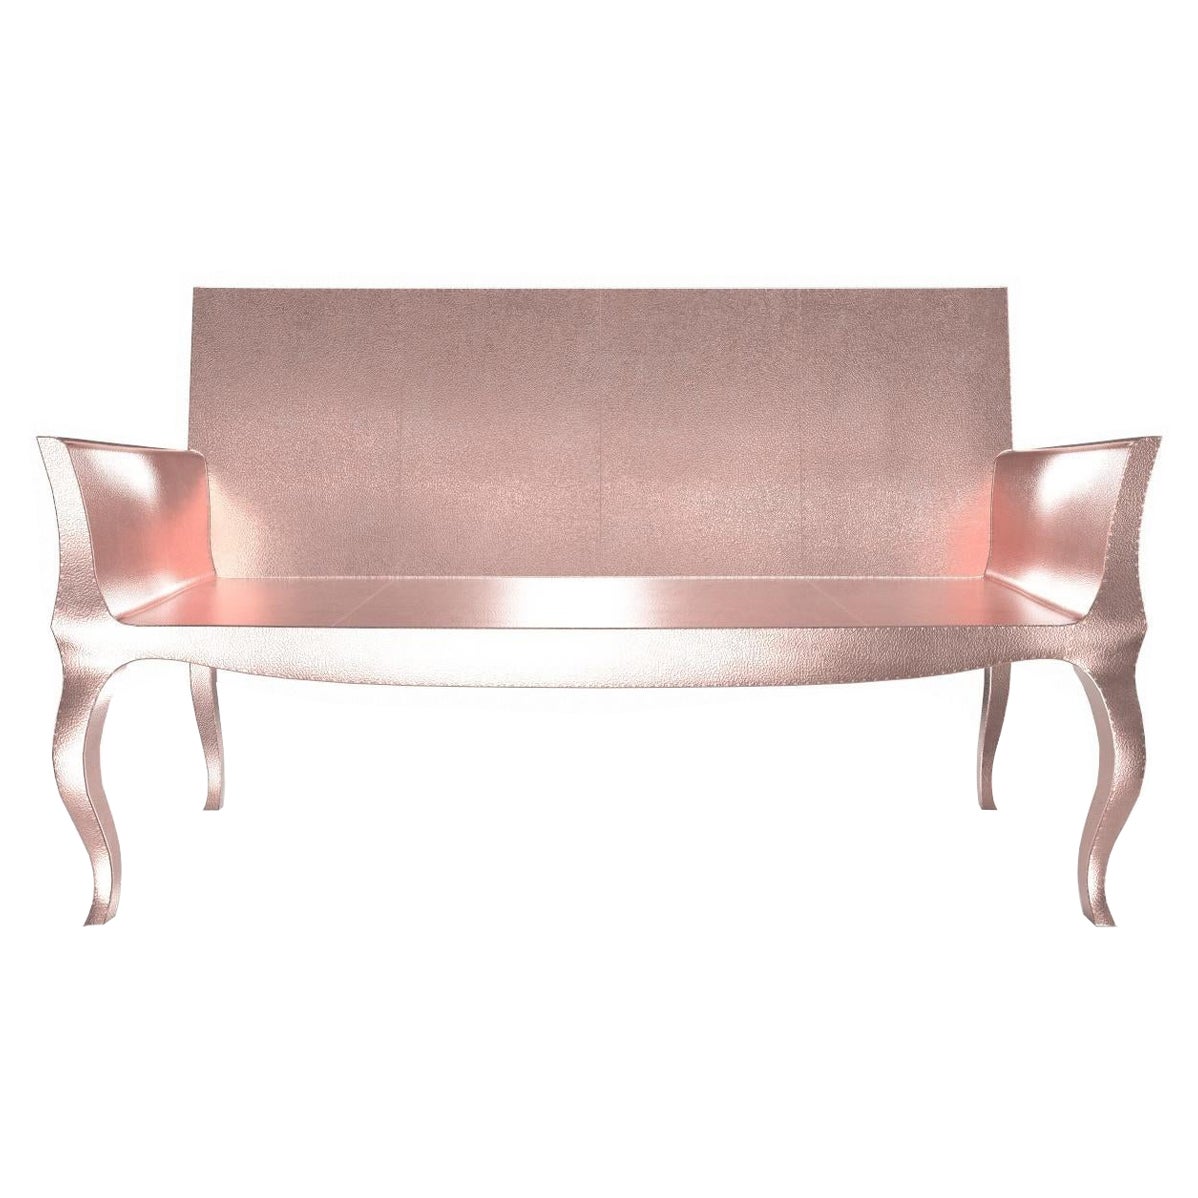 Louise Settee Art Deco Chaise Longues in Fine Hammered Copper by Paul Mathieu